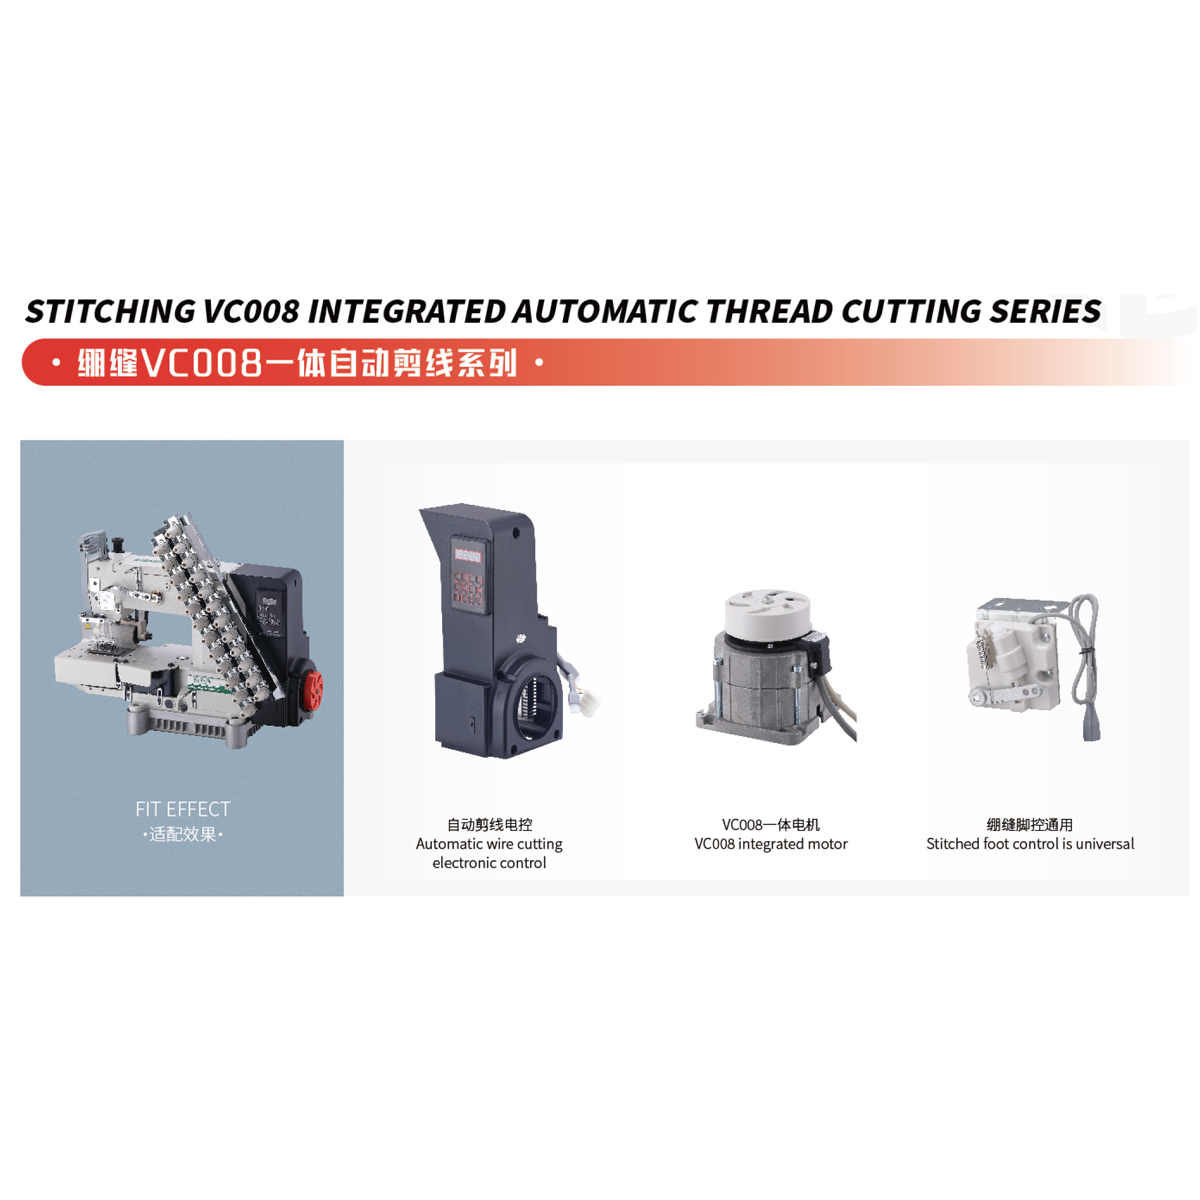 STITCHING VCO08 INTEGRATED AUTOMATIC THREAD CUTTING SERIES